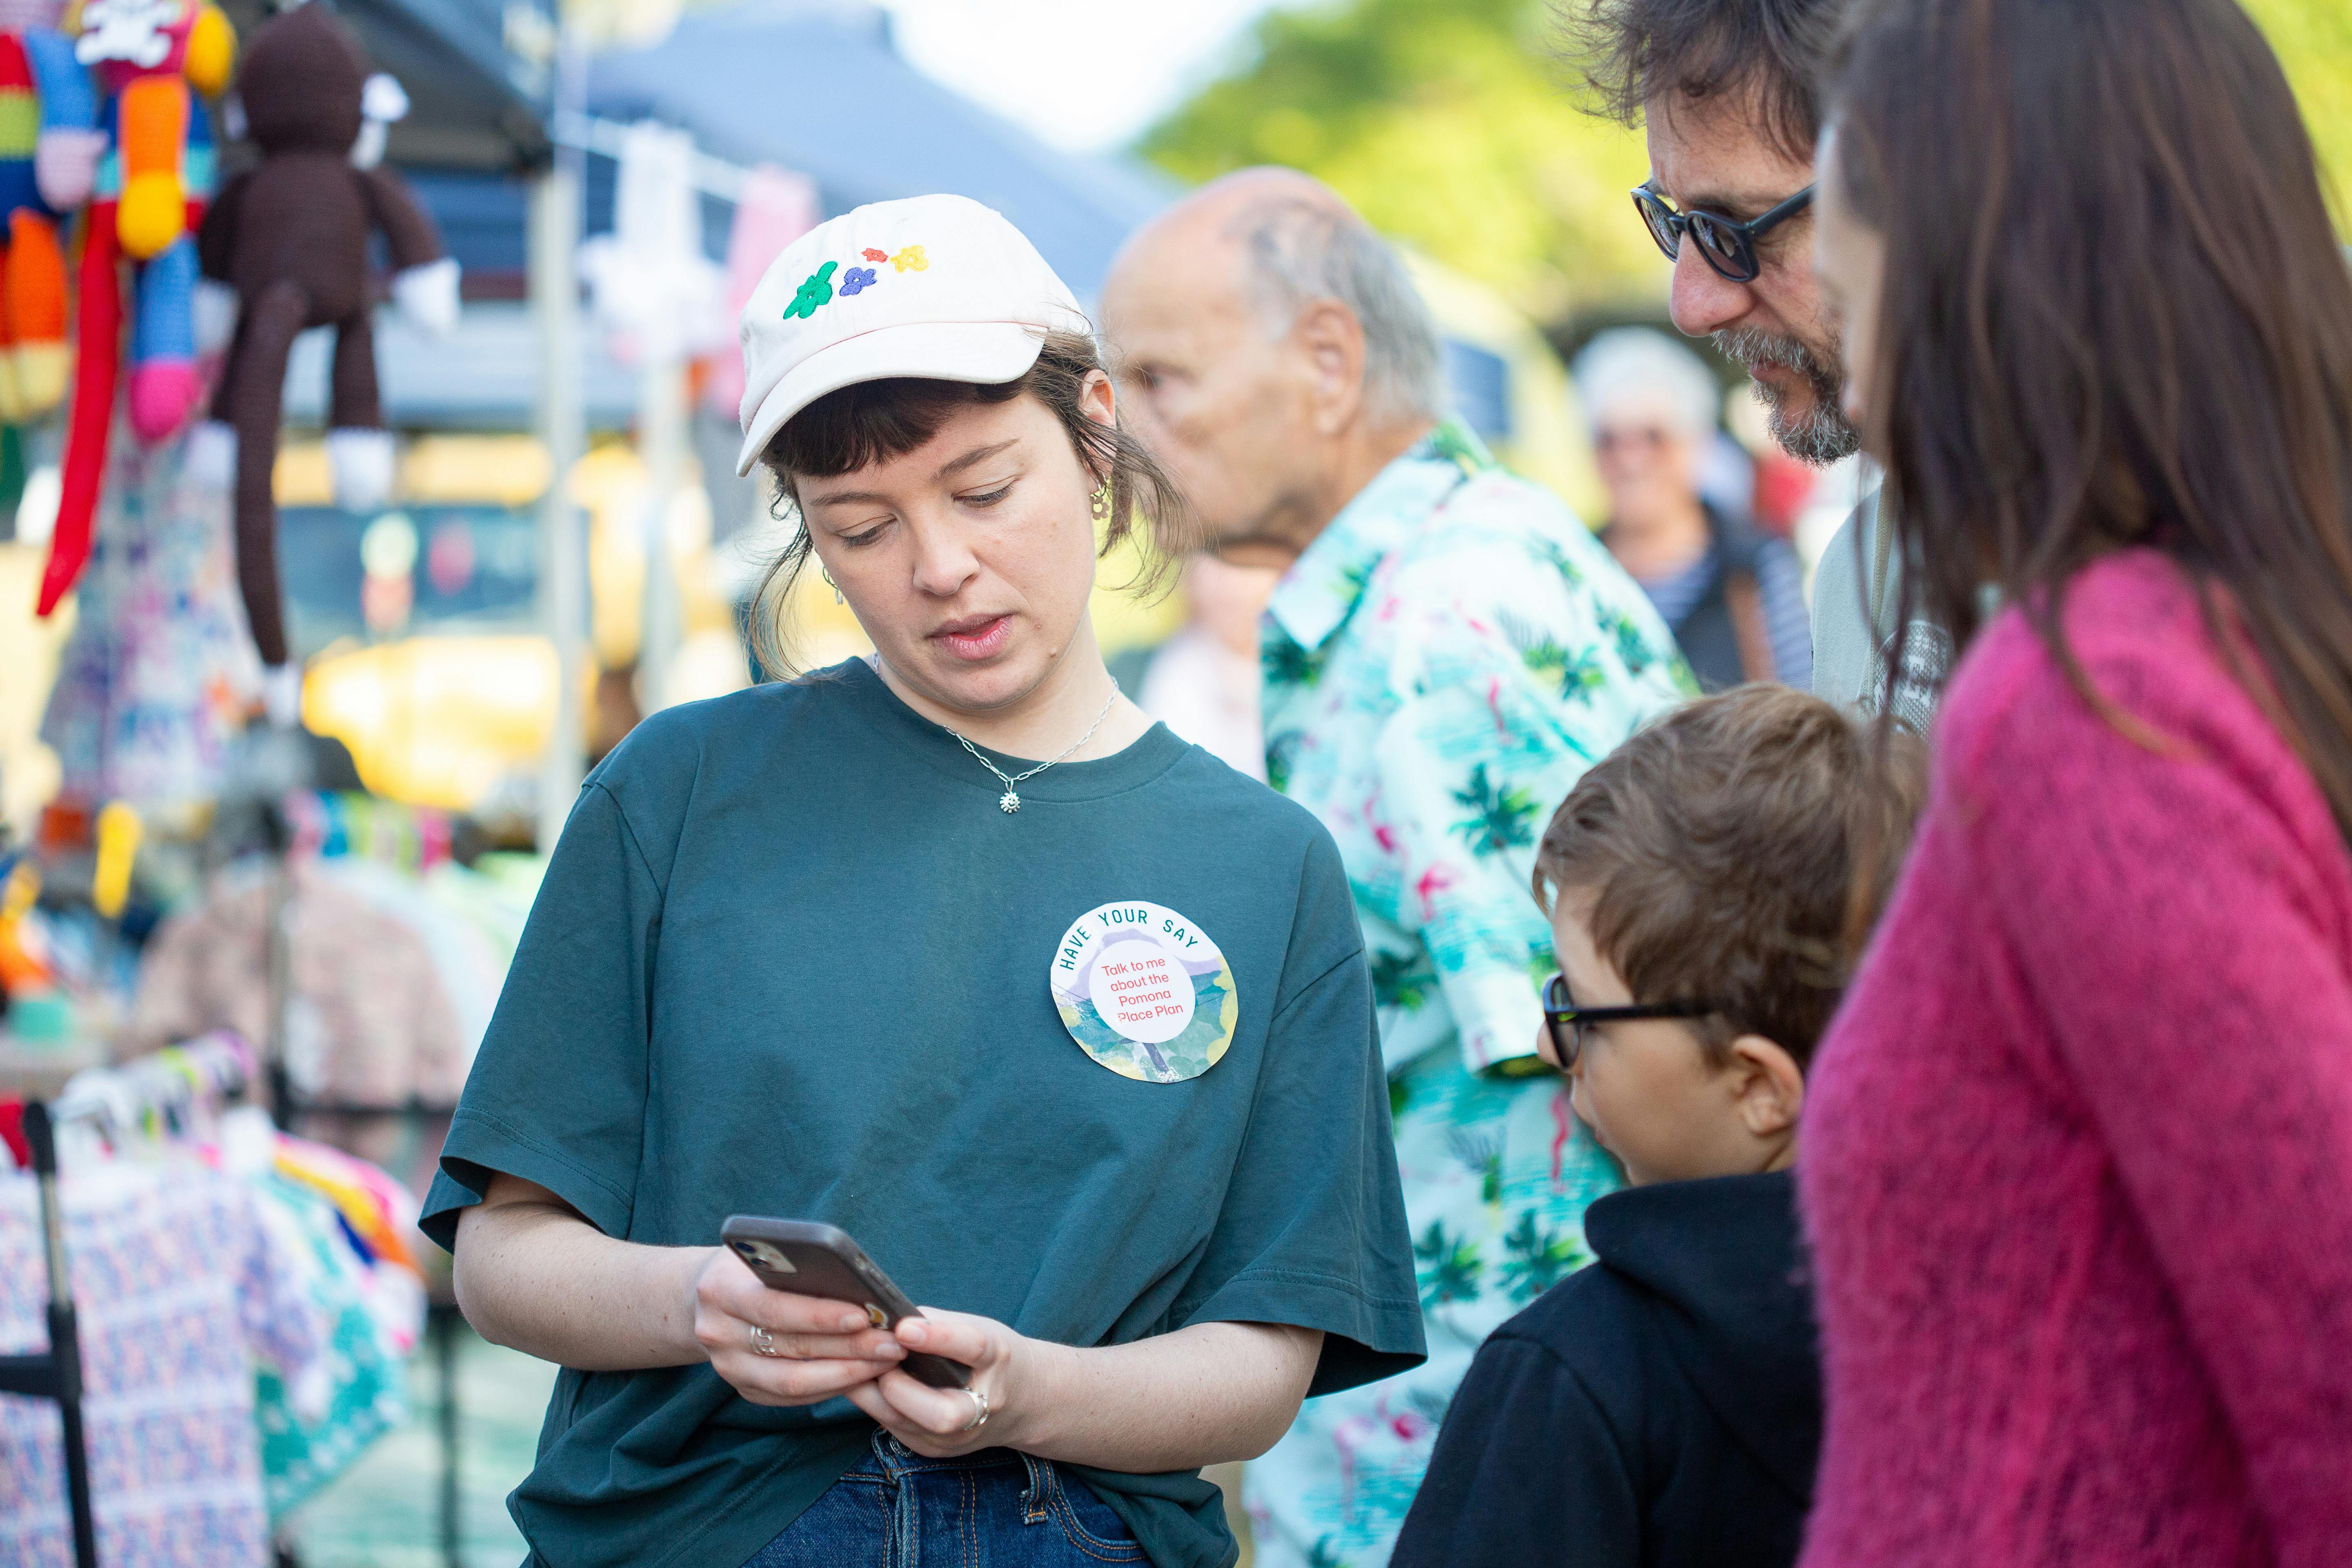 Engaging the community at the Pomona Markets. Image courtesy of Kylie Harber Photography